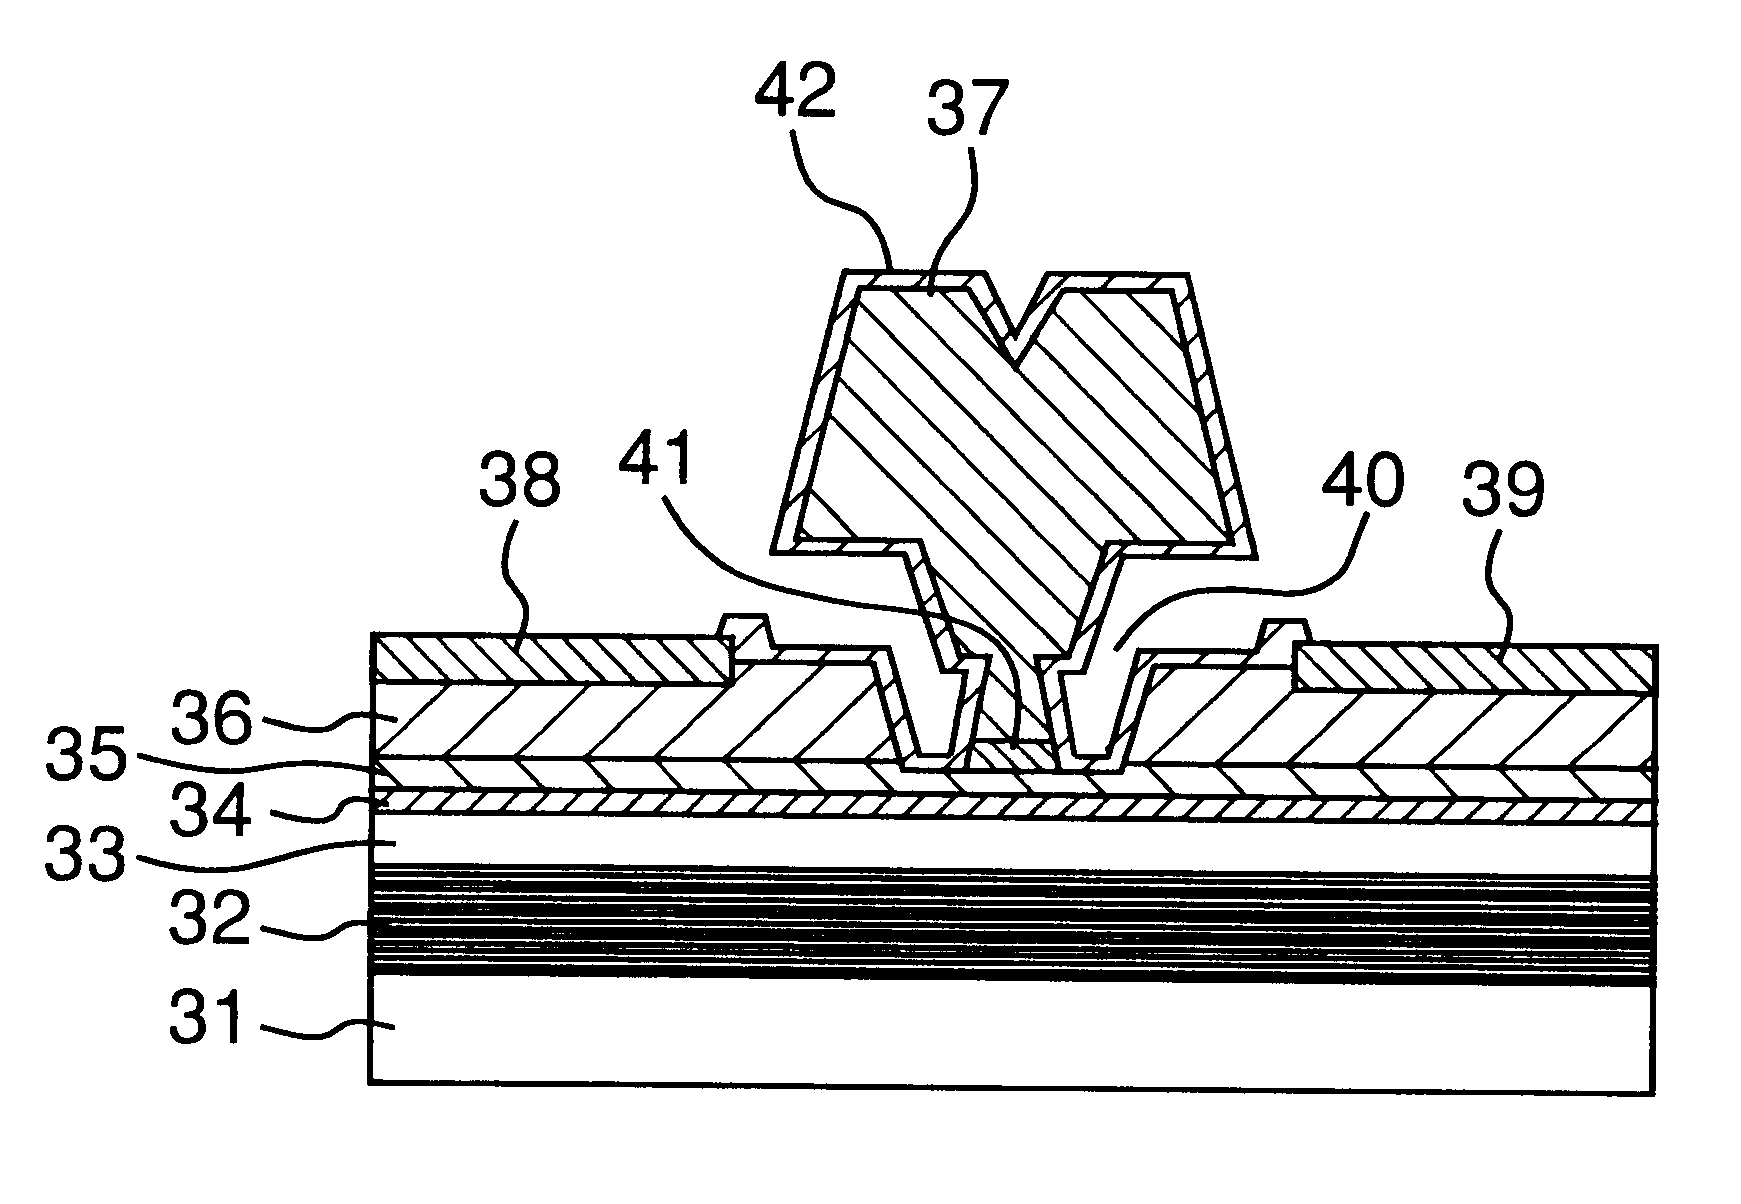 Field effect semiconductor device